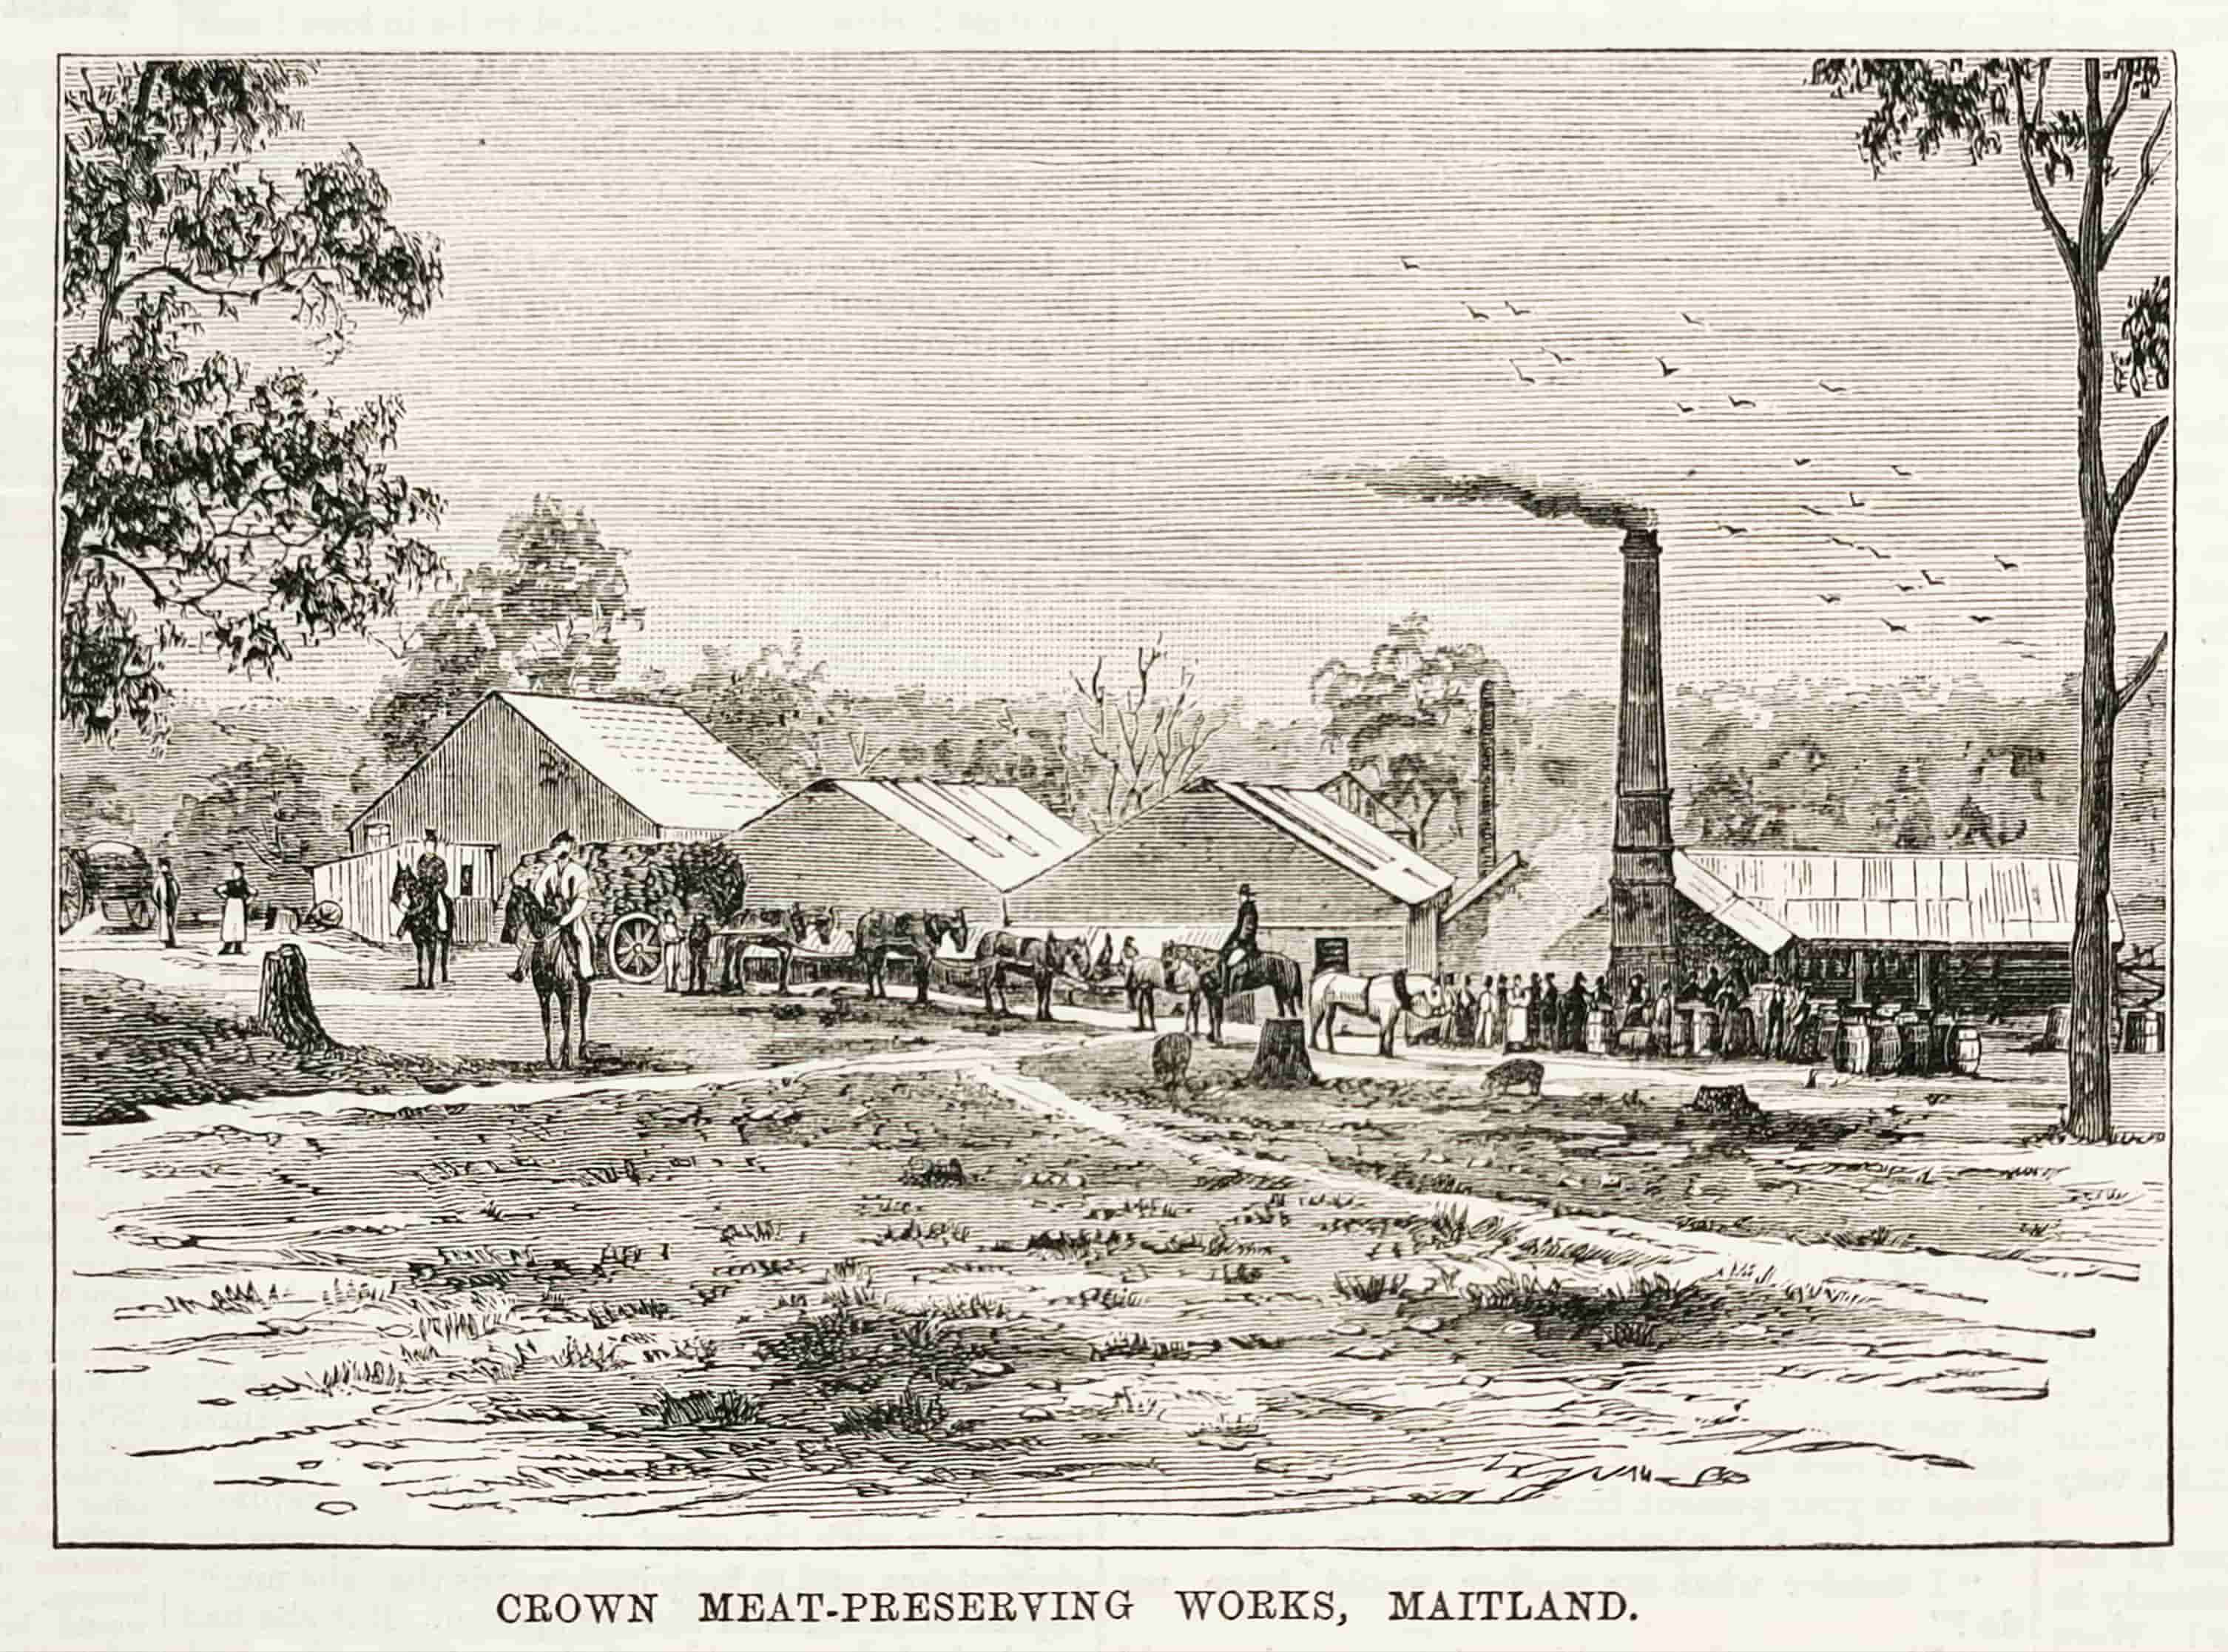 Crown Meat-preserving Works, Maitland. - Antique View from 1879